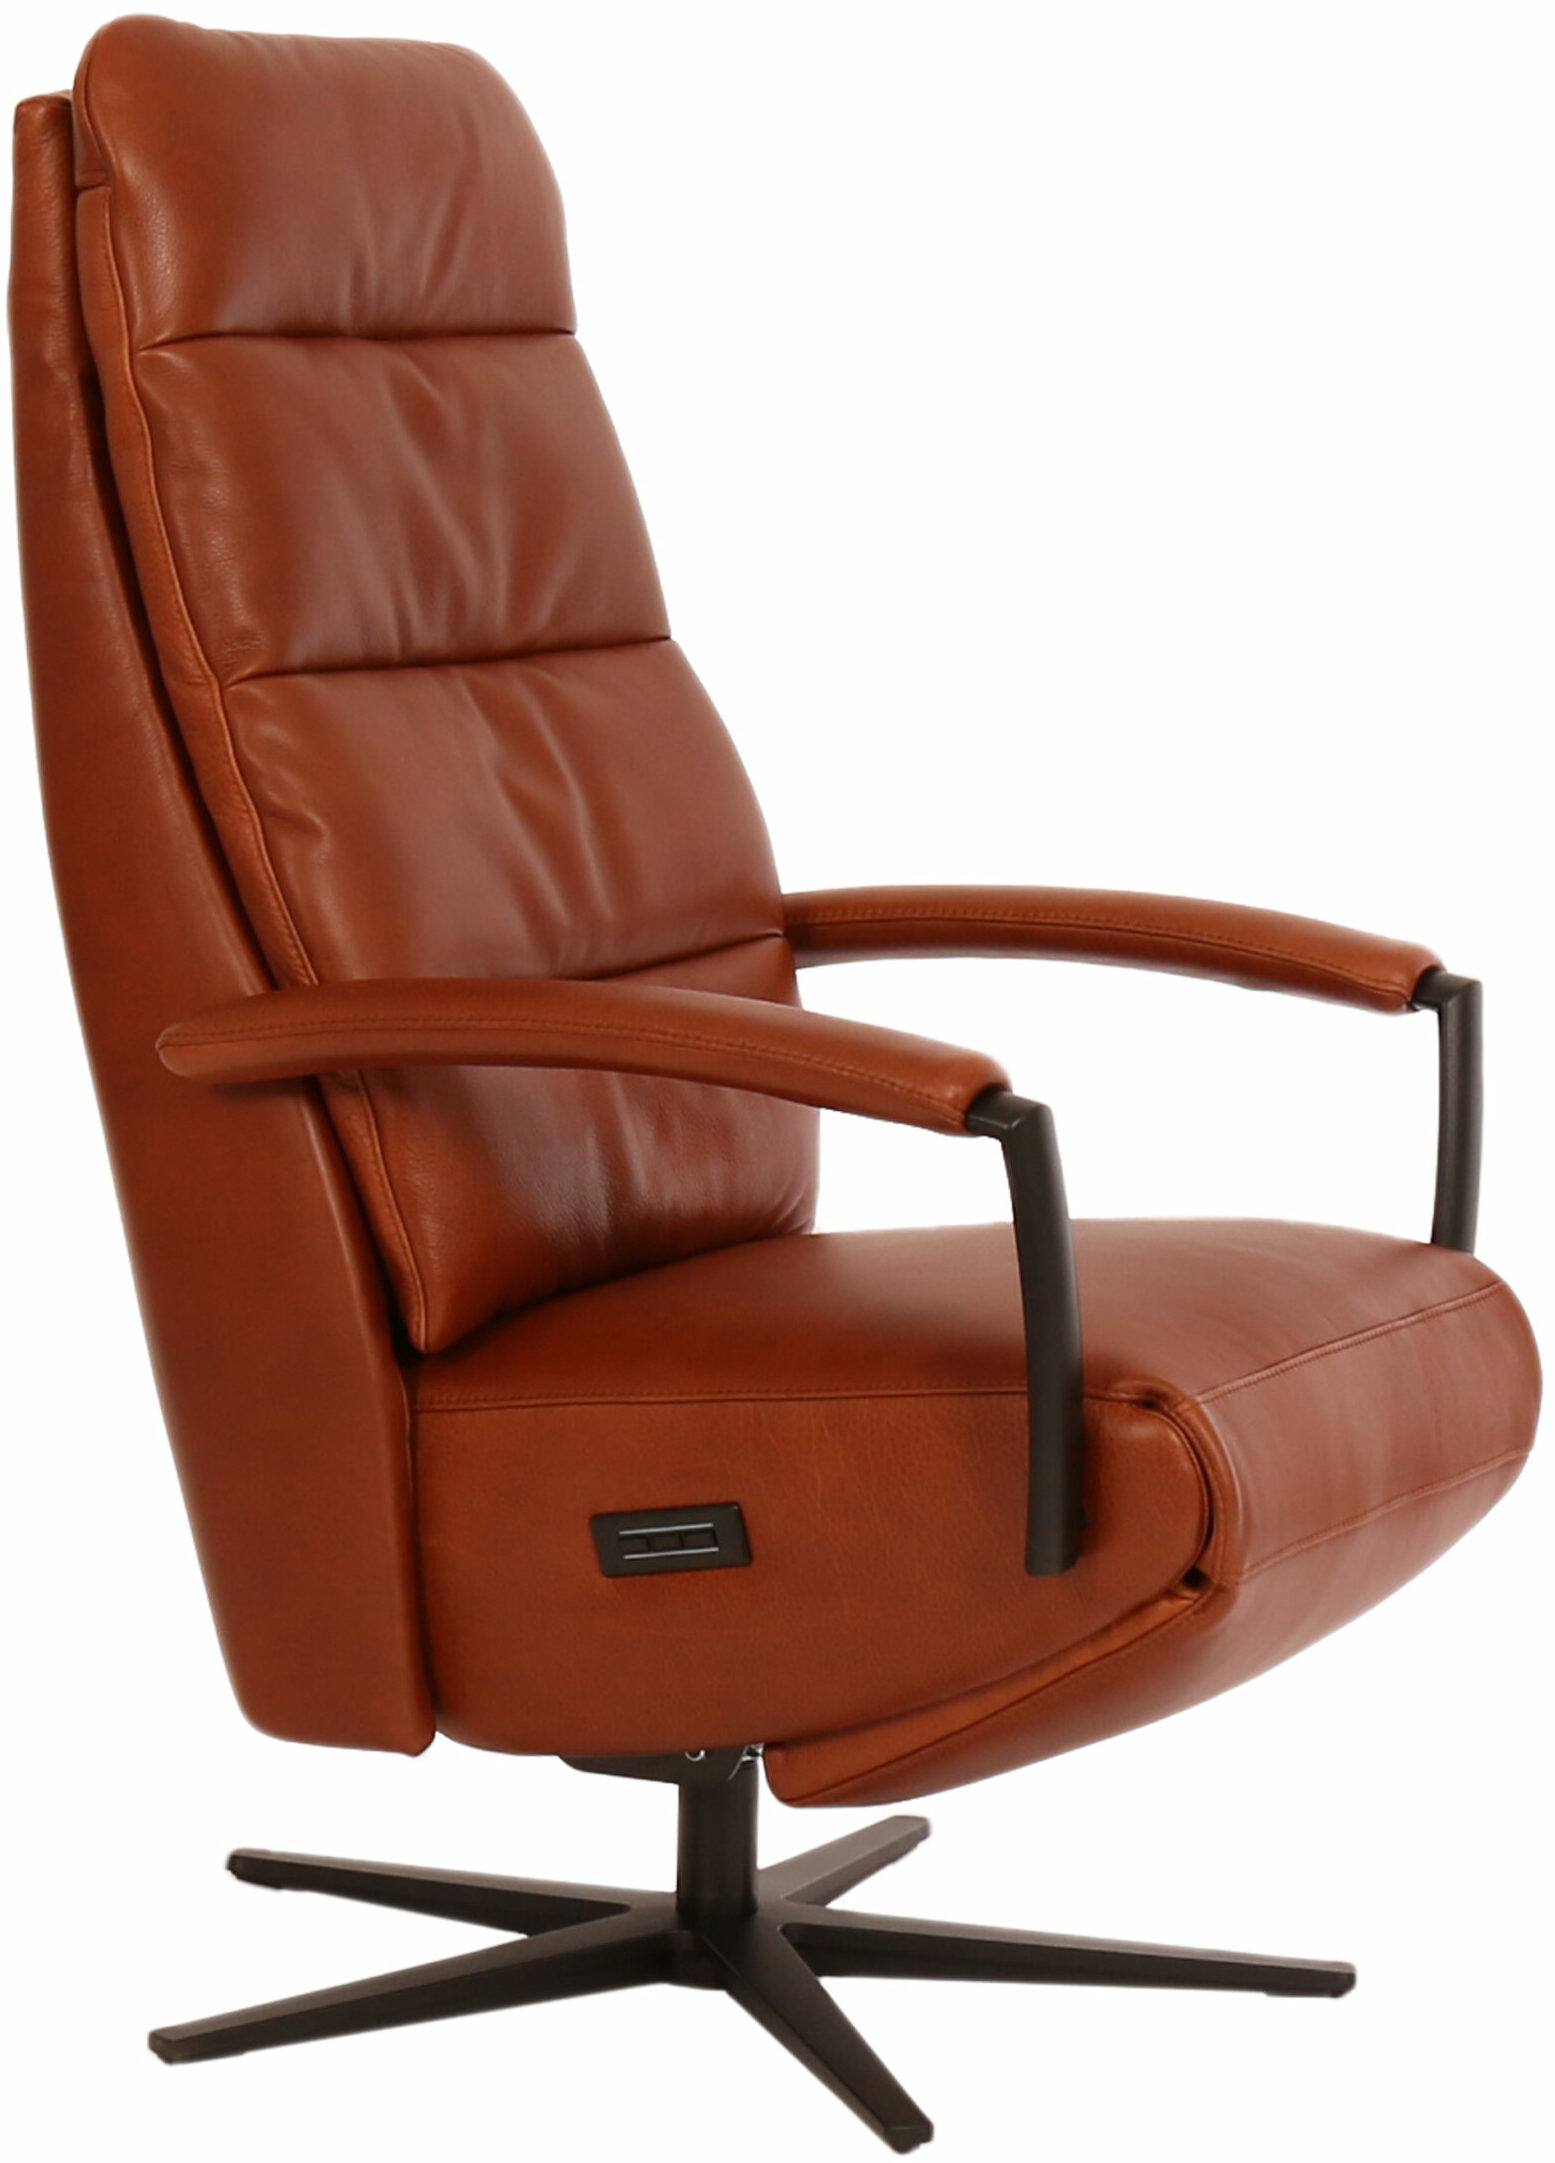 Twinz 233 relaxfauteuil